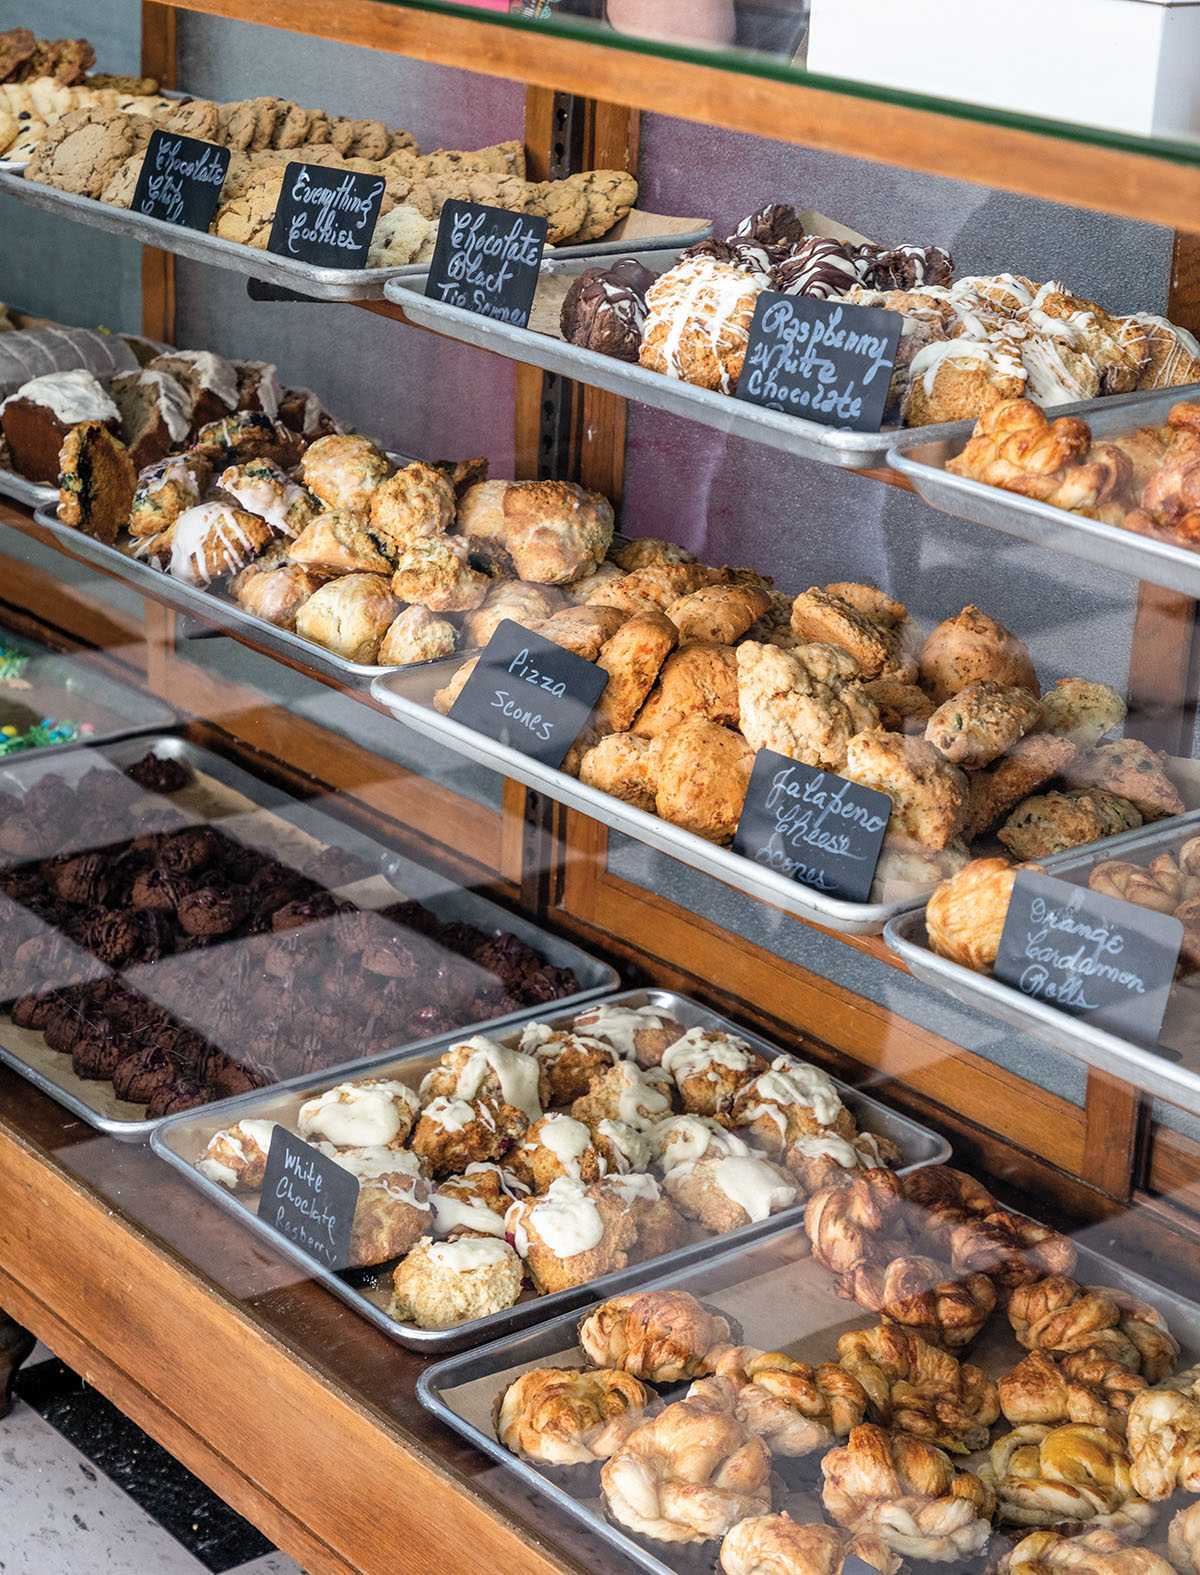 A bakery display case with numerous pastries and treats along with chalkboard labels